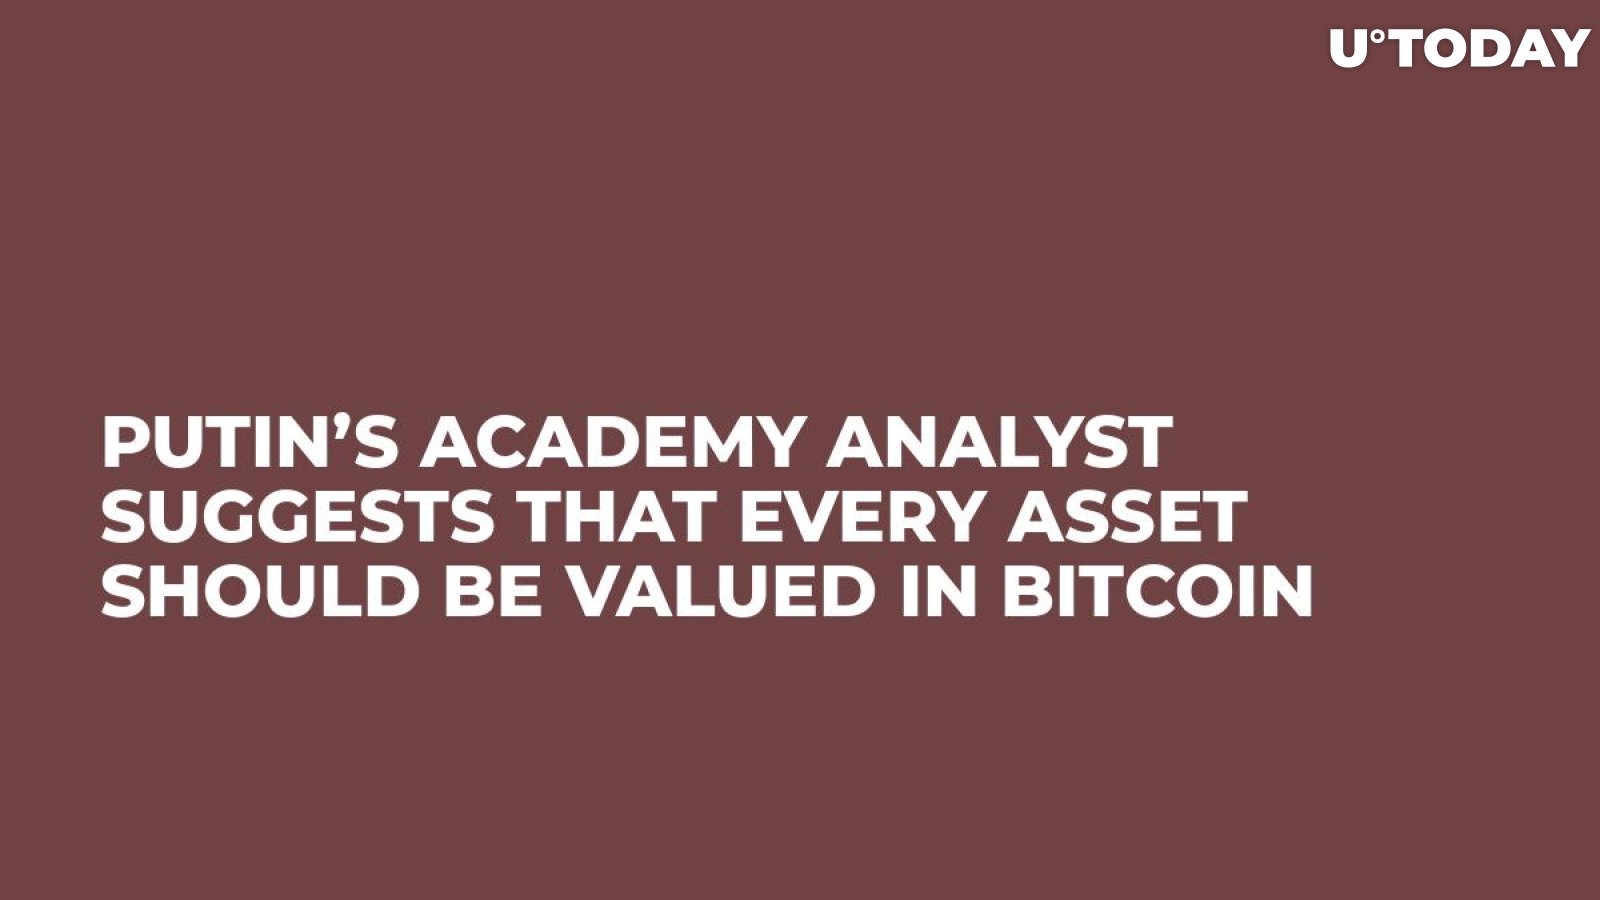 Putin’s Academy Analyst Suggests That Every Asset Should Be Valued in Bitcoin 